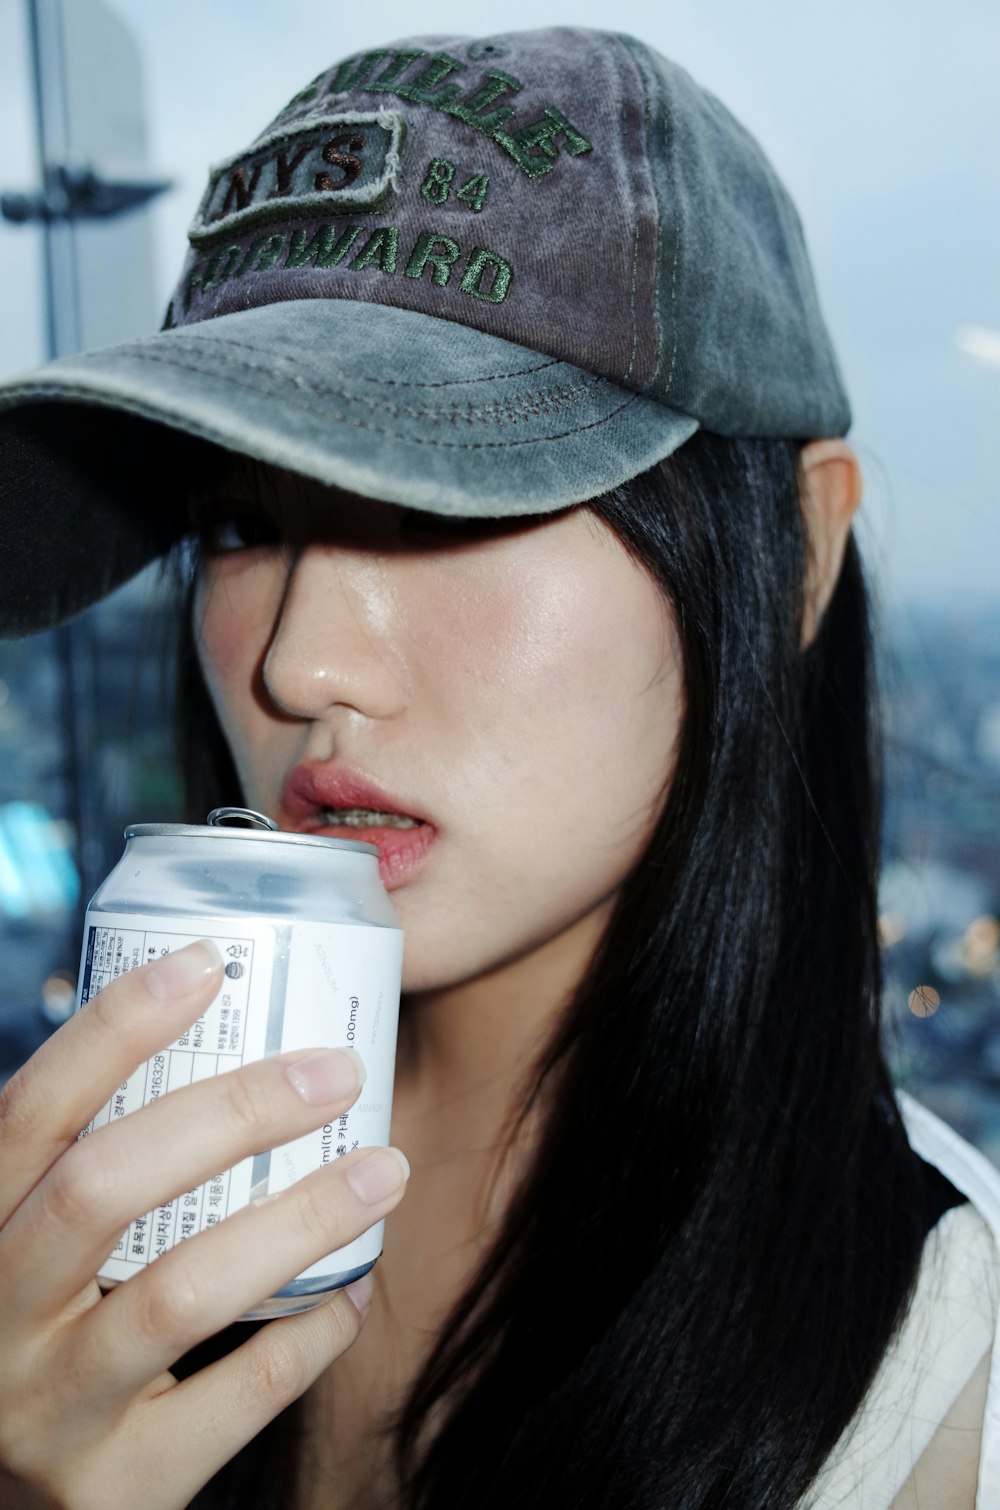 a woman wearing a hat drinking a can of beer